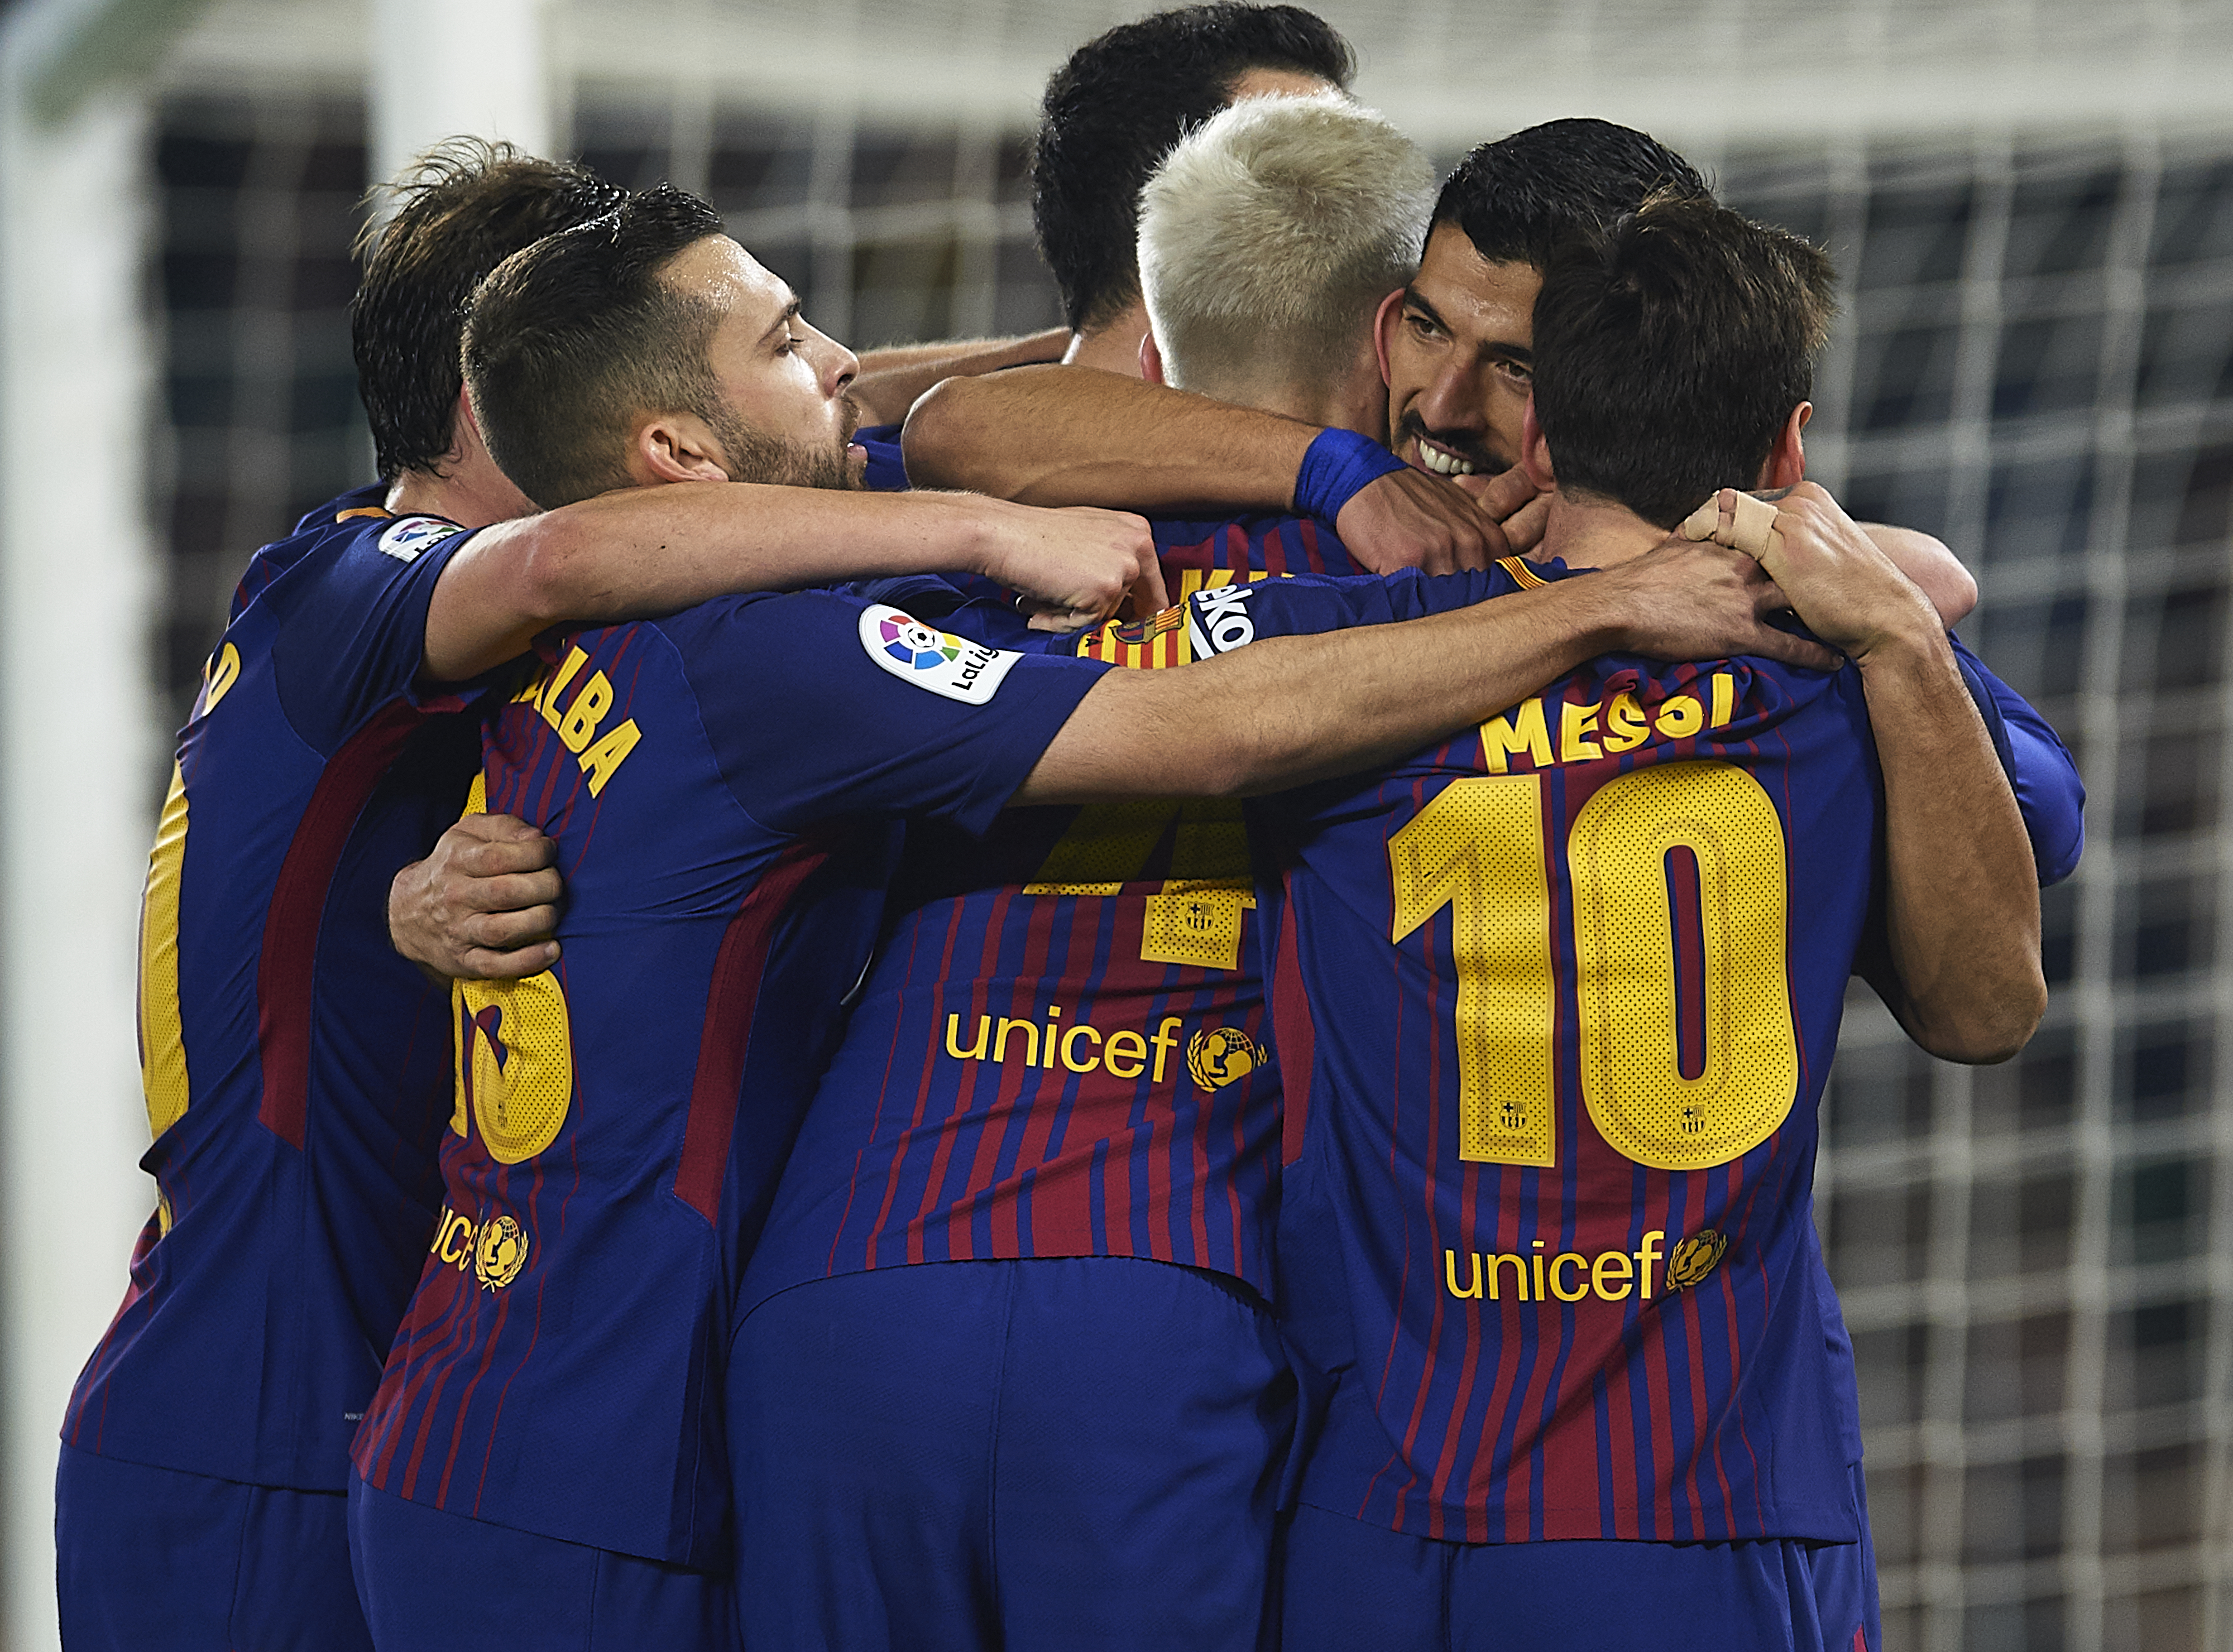 SEVILLE, SPAIN - JANUARY 21:  Luis Suarez of FC Barcelona  celebrates after scoring the third goal for FC Barcelona with his team mates during the La Liga match between Real Betis and Barcelona at Estadio Benito Villamarin on January 21, 2018 in Seville, .  (Photo by Aitor Alcalde/Getty Images)